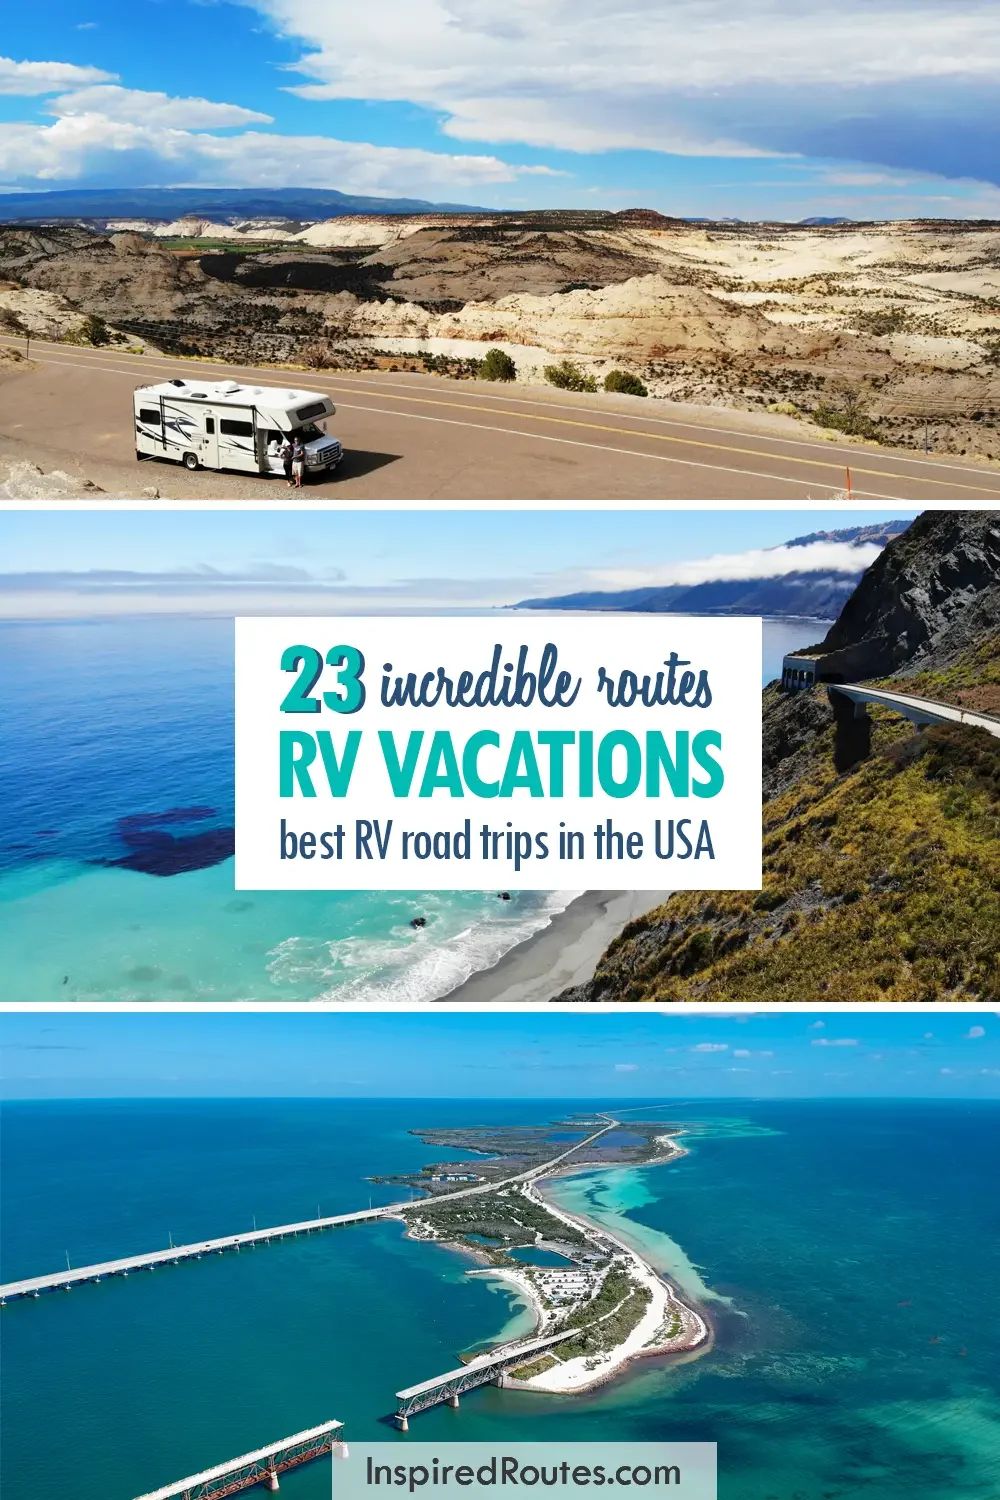 text that reads 23 incredible routes rv vacations best rv road trips in the USA with images of roads with rv through canyon near beach and over the water bridge